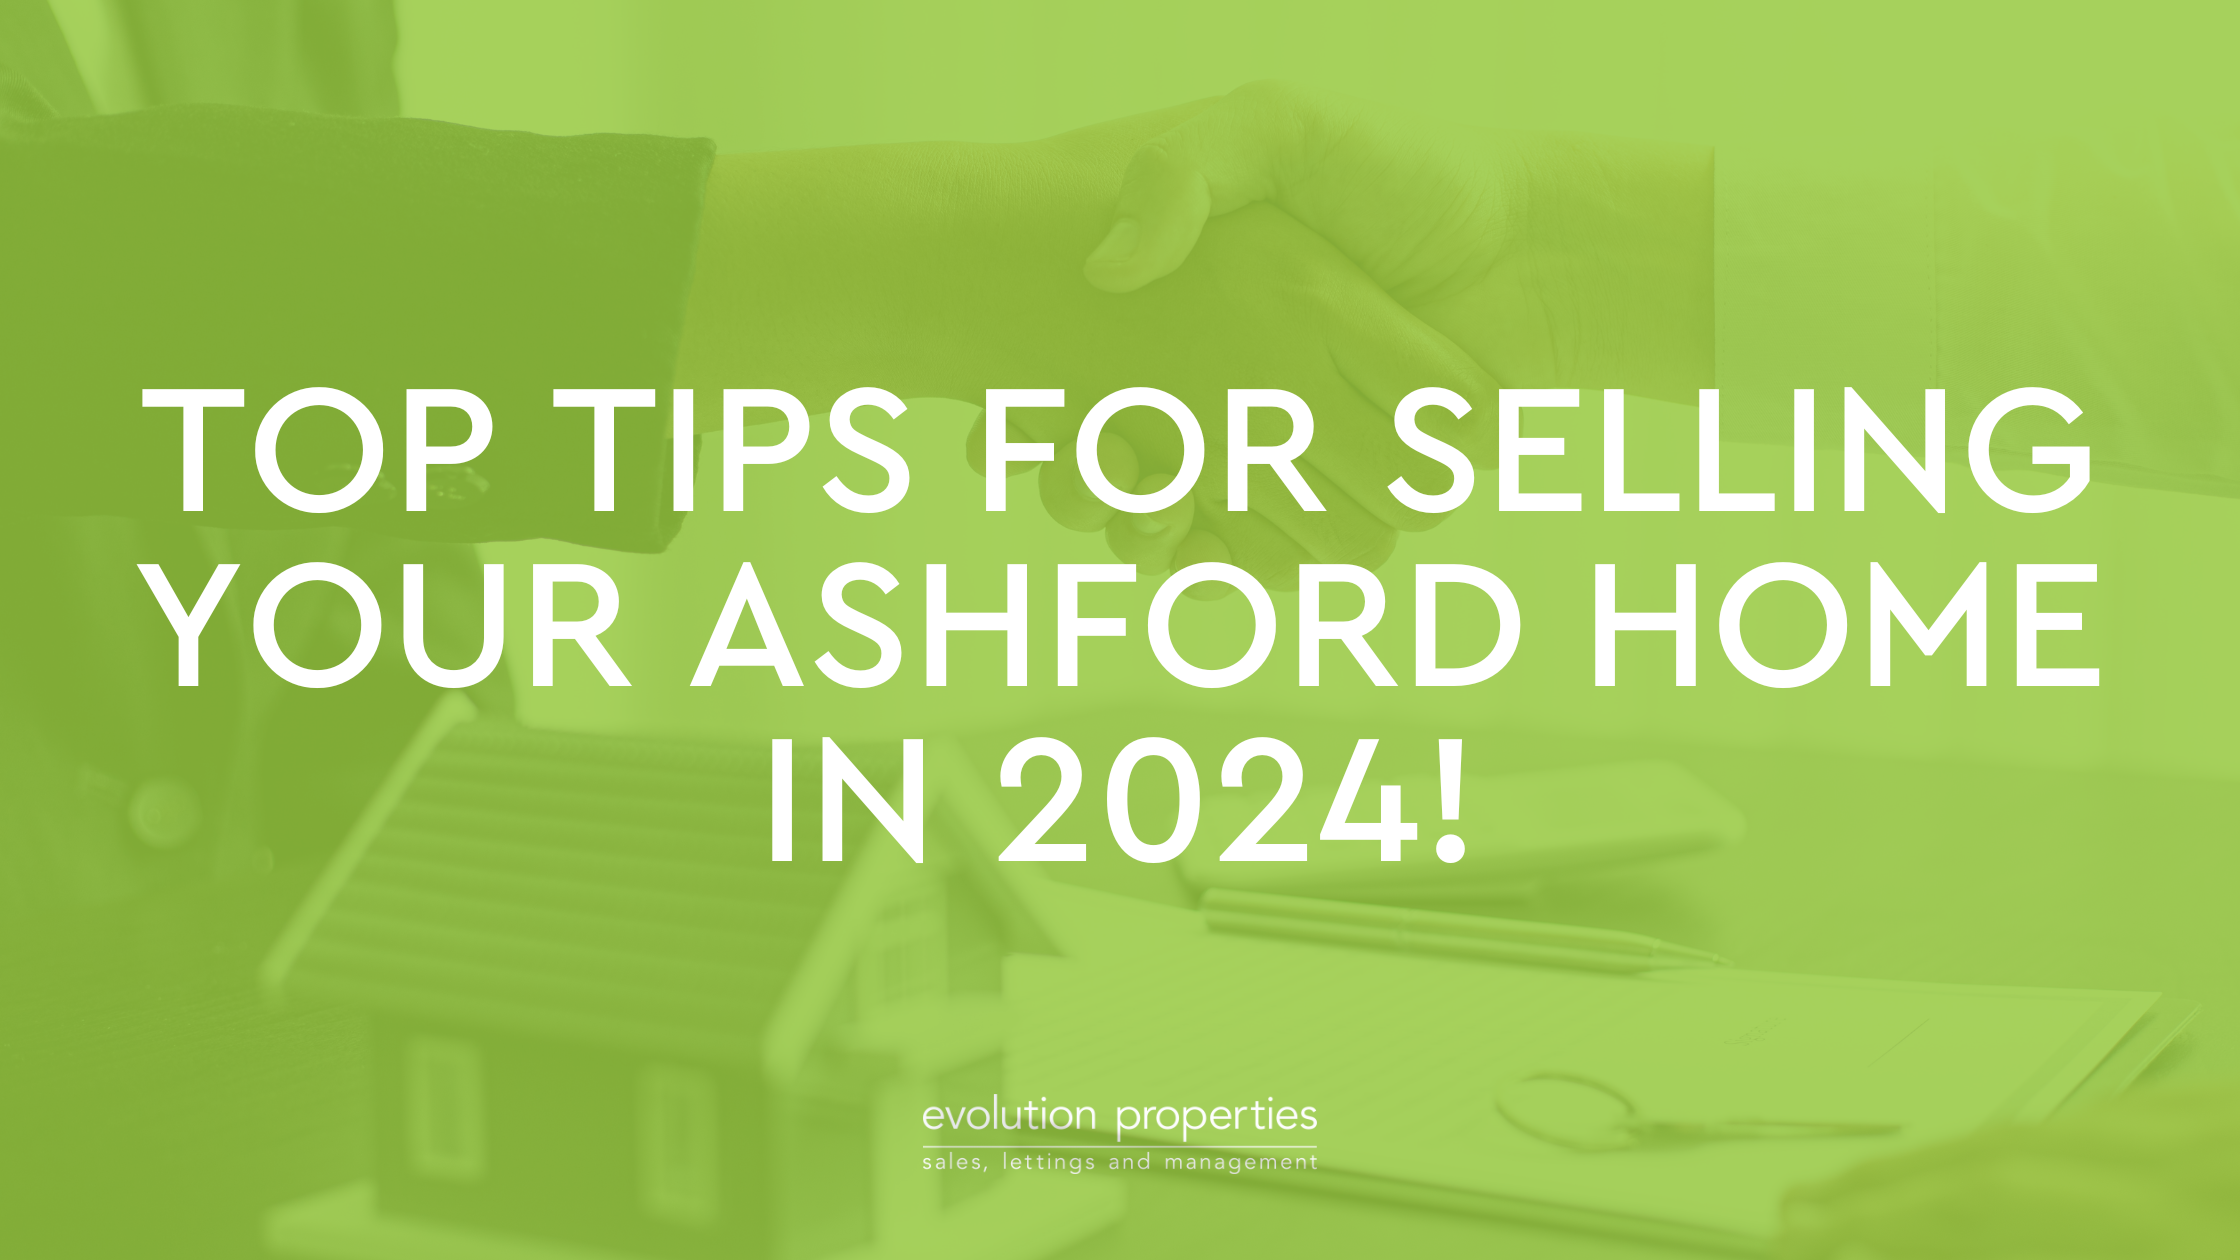 Top Tips for Selling Your Ashford Home in 2024